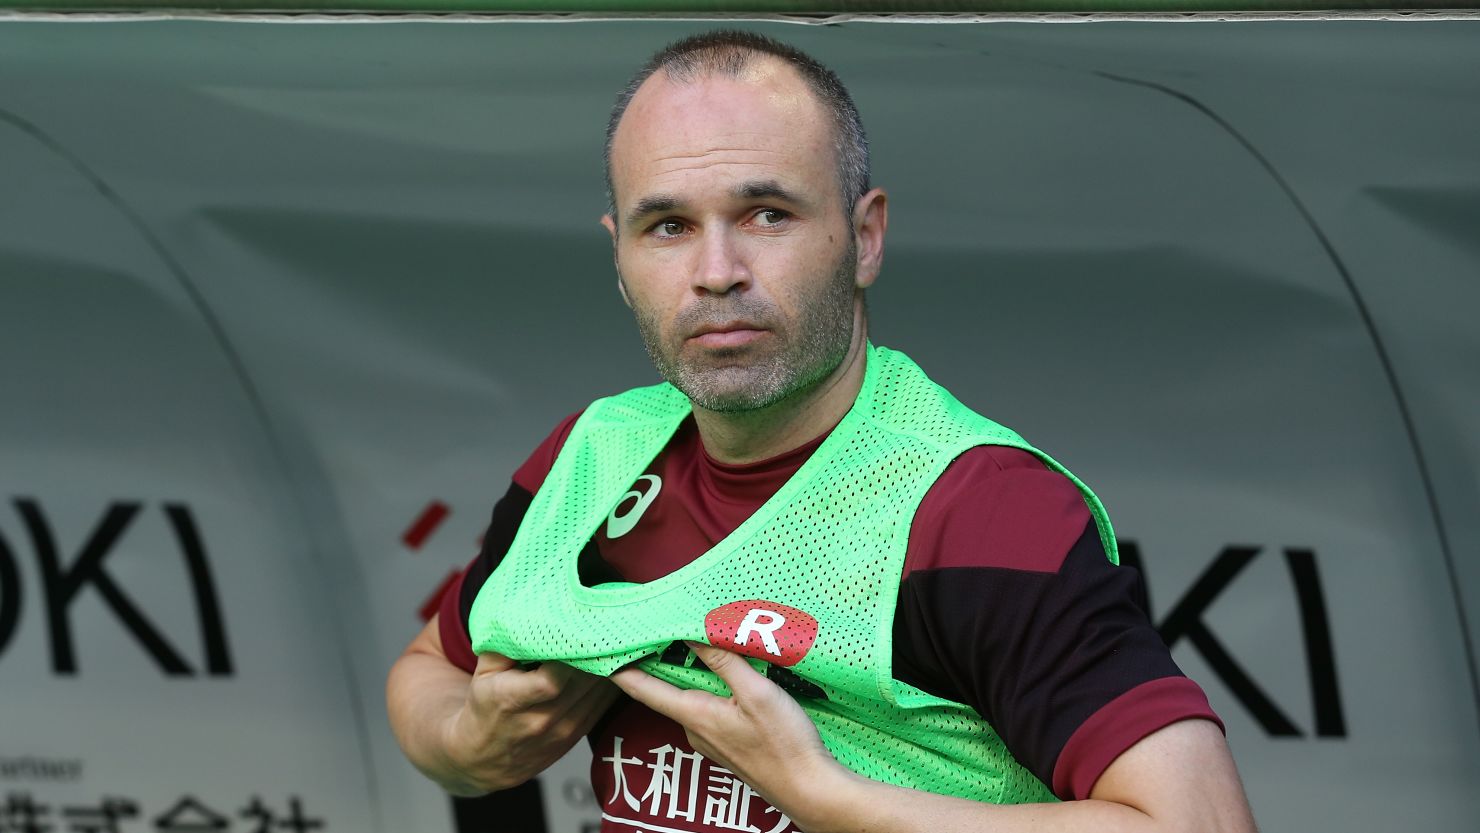 Iniesta played 674 matches for Barcelona.